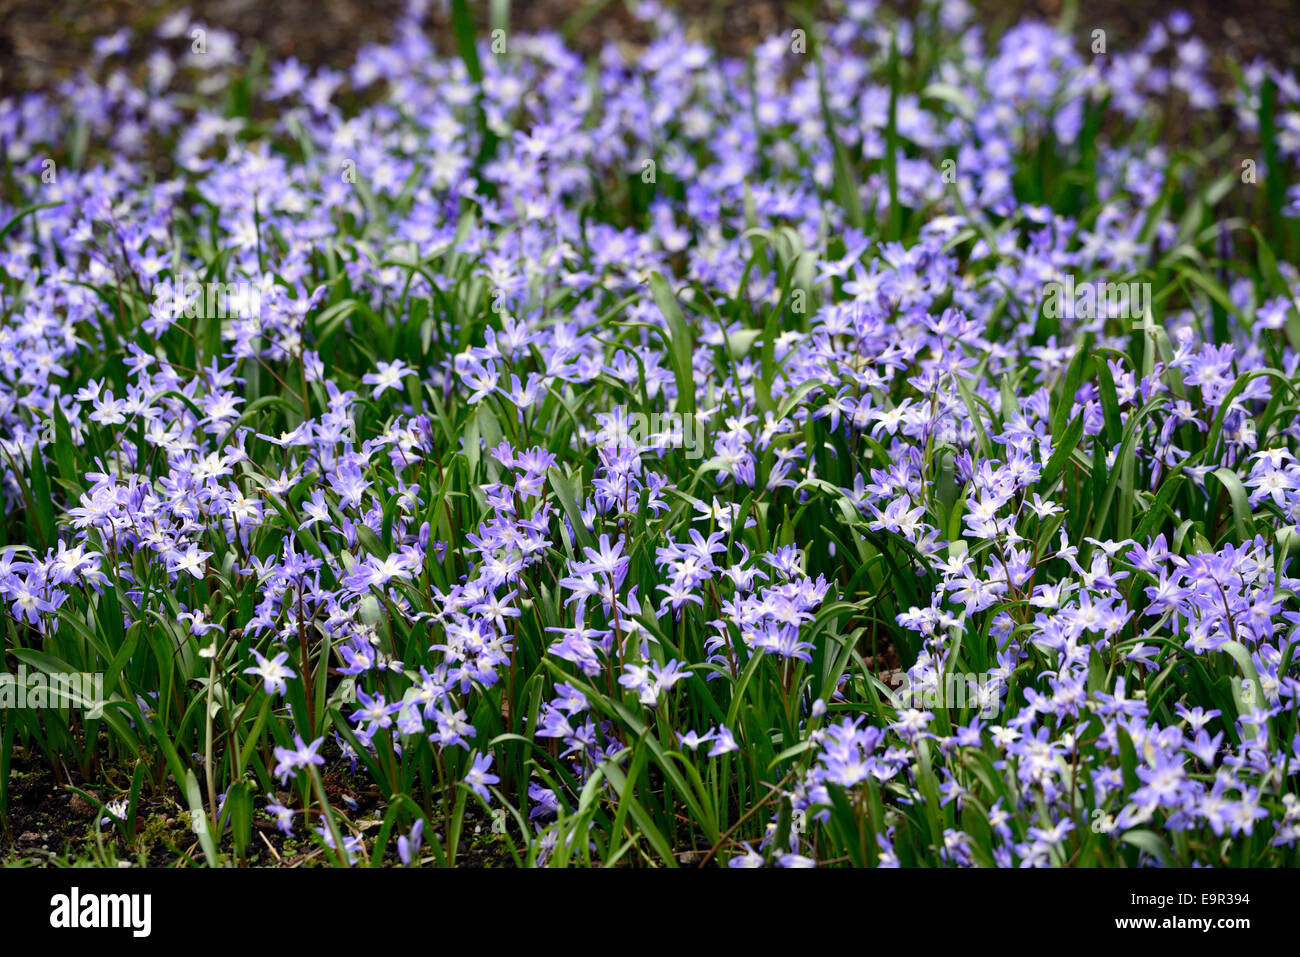 chionodoxa forbesii Glory of the snow flowers spring Scilla forbesii bloom blossom blue lilac flowers flowering RM Floral Stock Photo